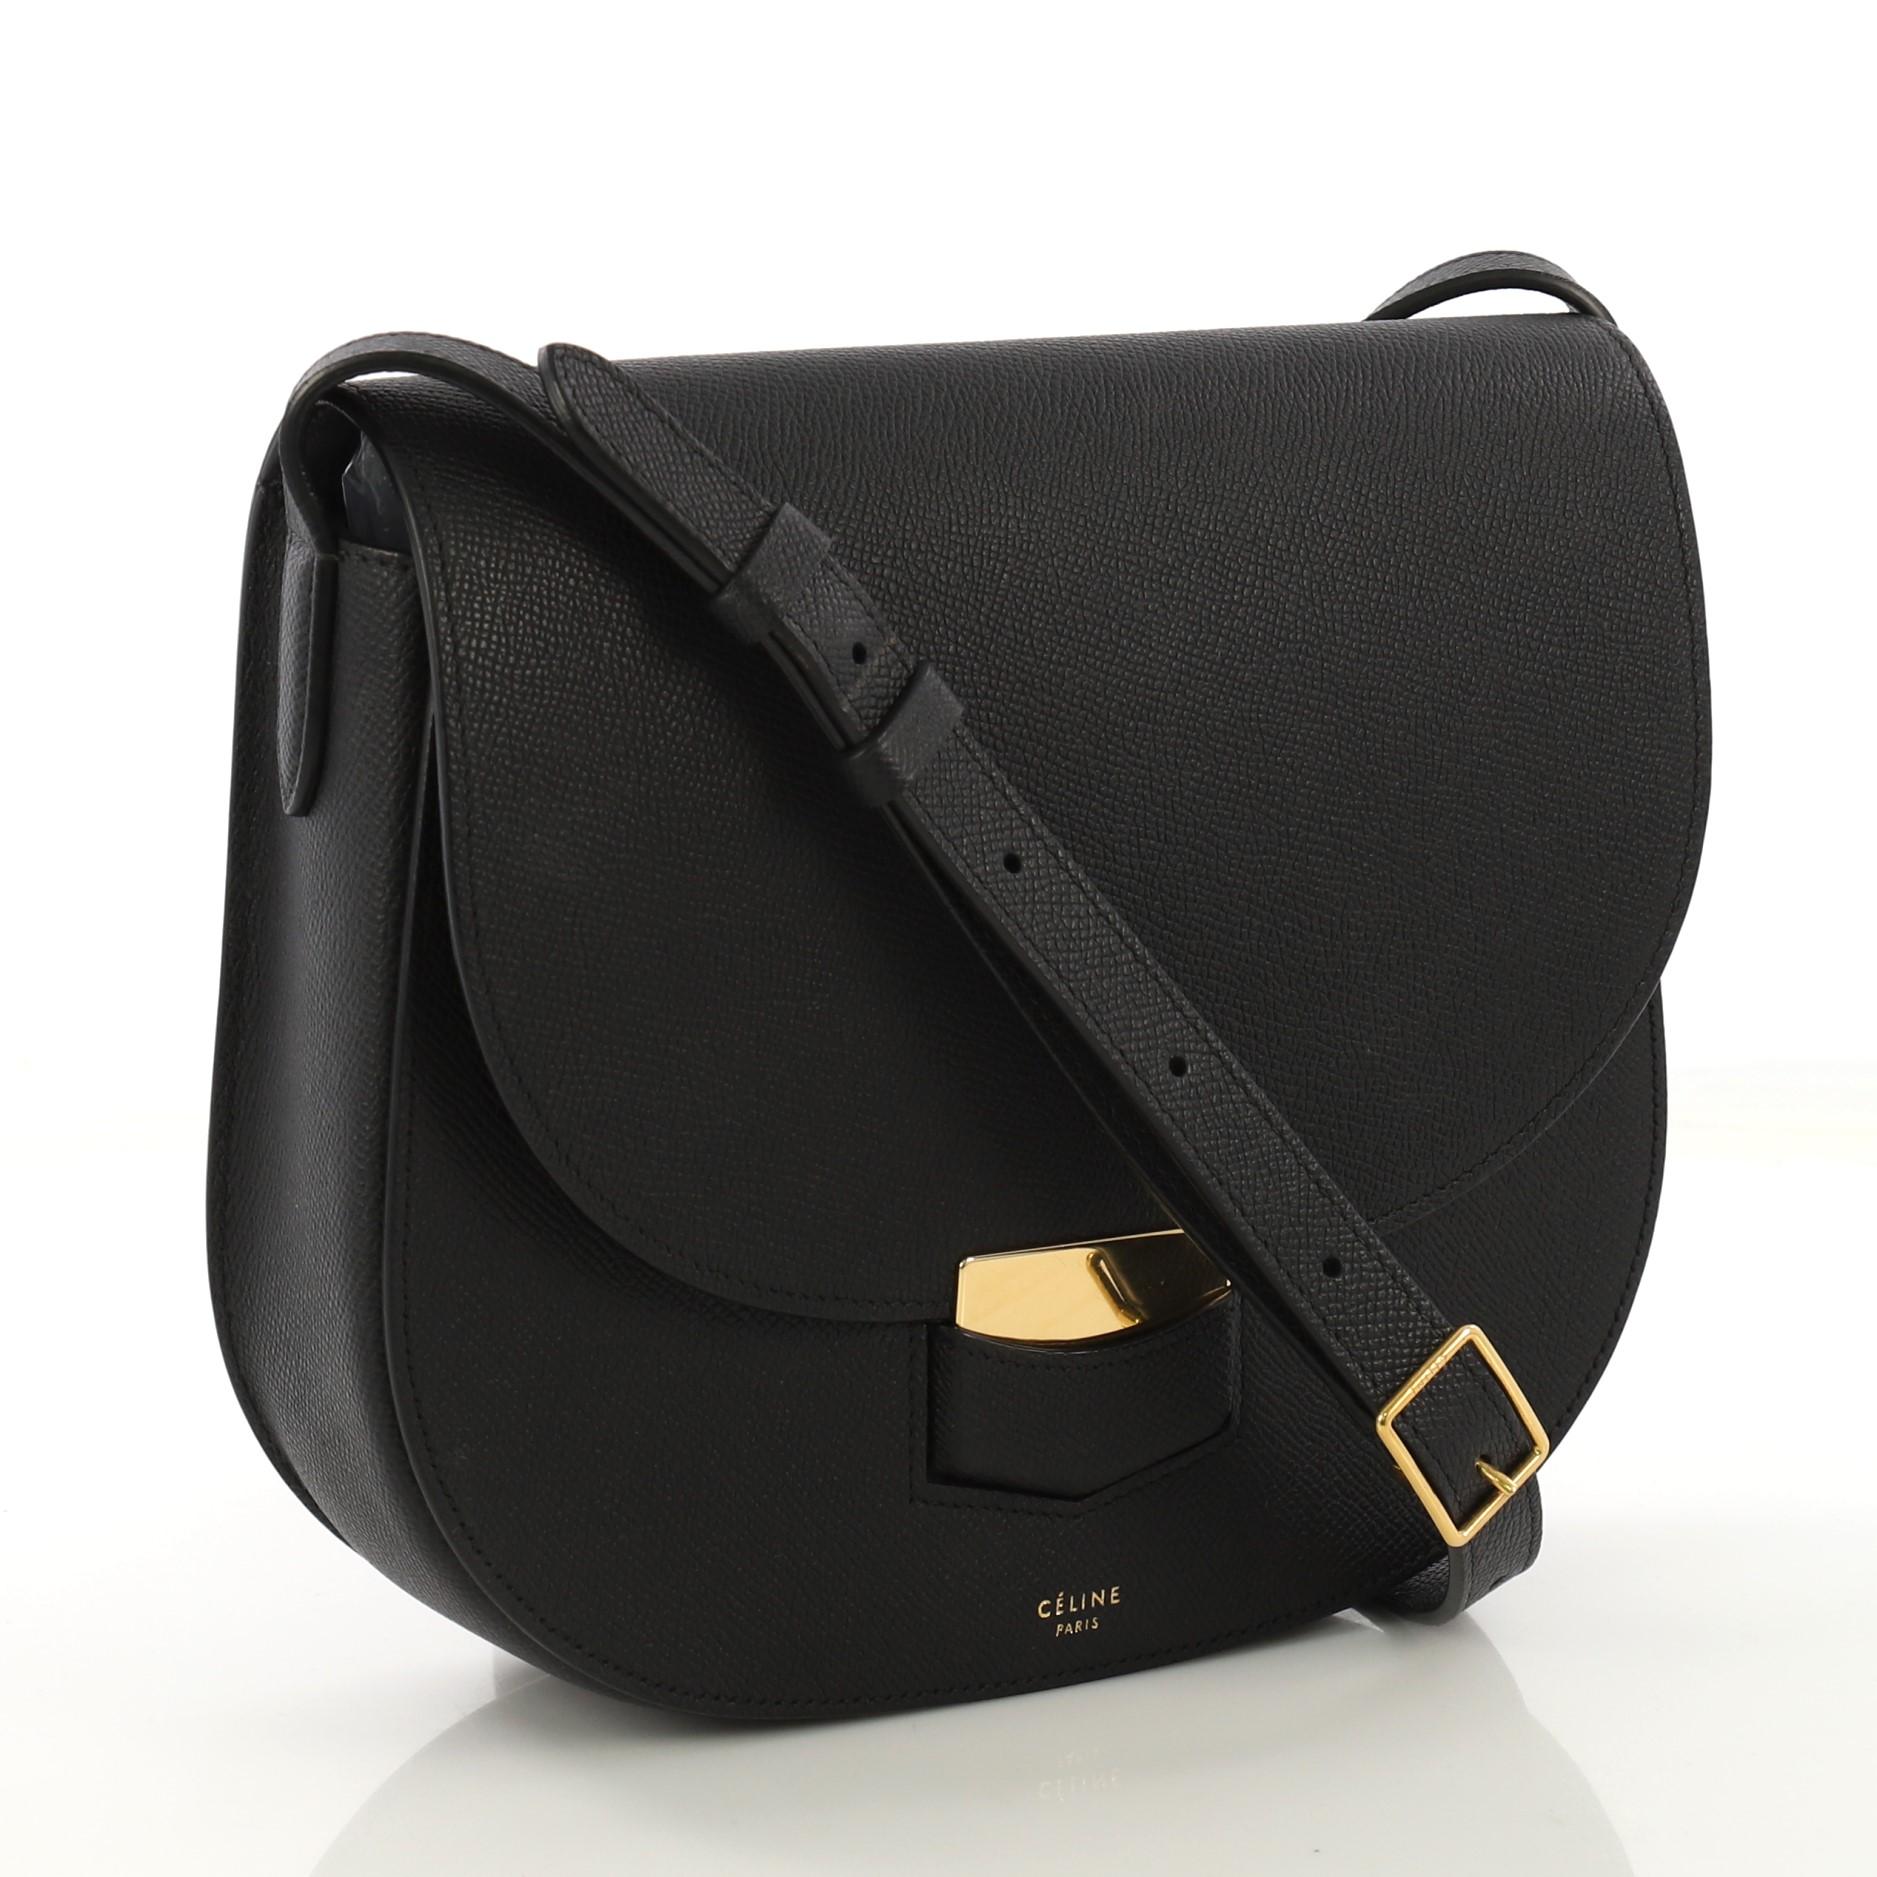 This Celine Trotteur Crossbody Bag Grainy Leather Medium, crafted from black grainy leather, features exterior back zip pocket, adjustable belted leather strap, and gold-tone hardware. Its hidden clasp closure opens to a black leather interior with